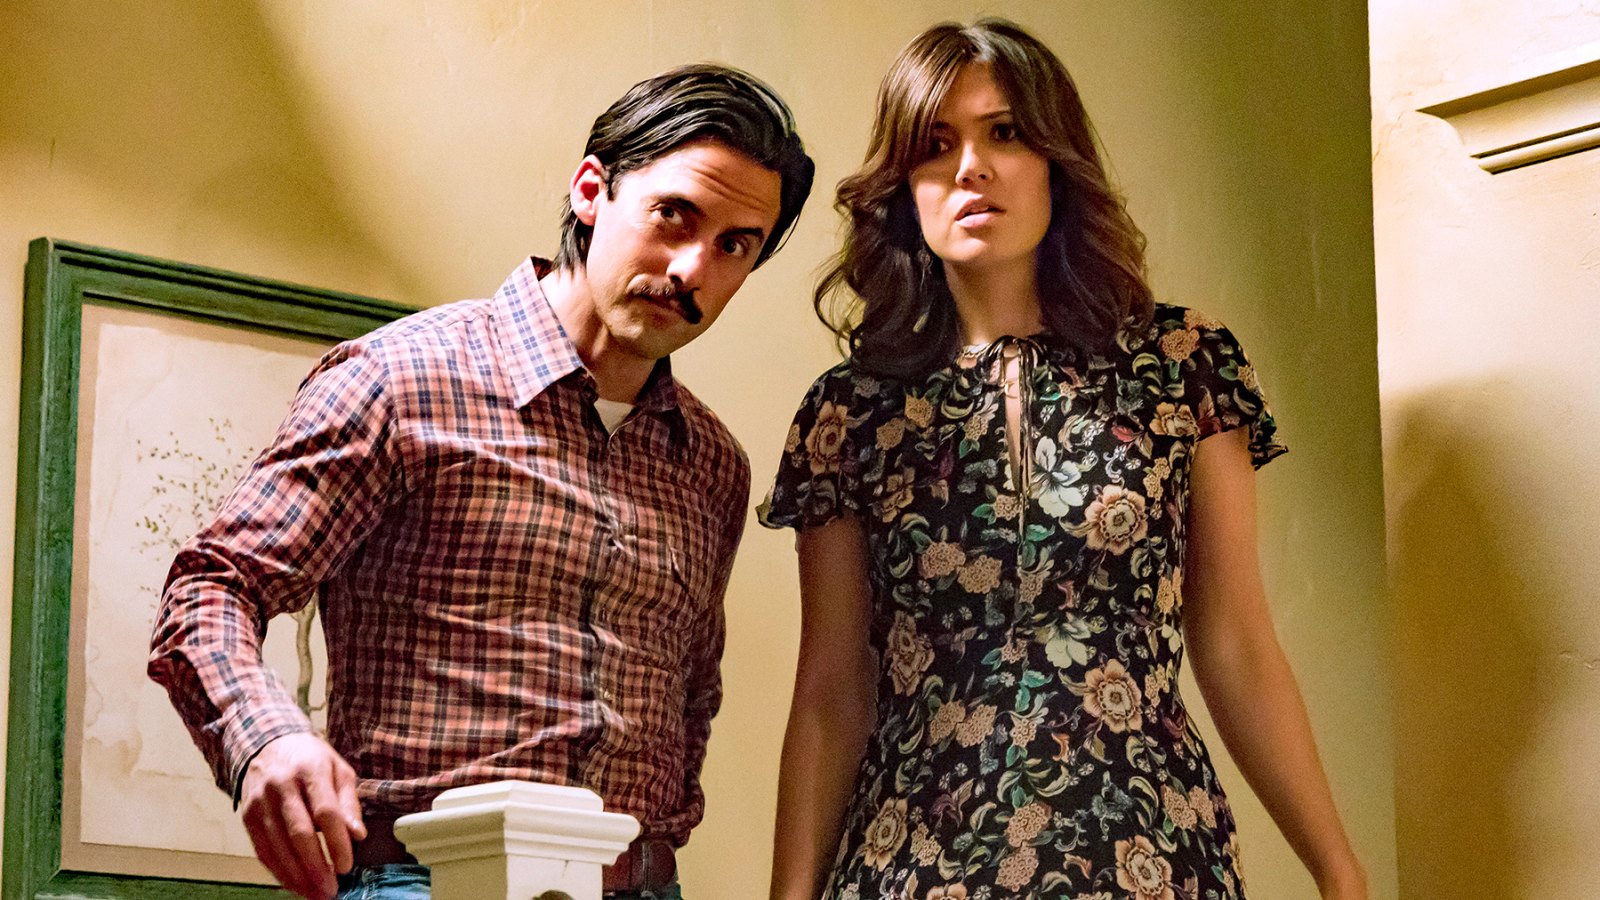 Milo Ventimiglia as Jack Pearson and Mandy Moore as Rebecca Pearson in This Is Us.